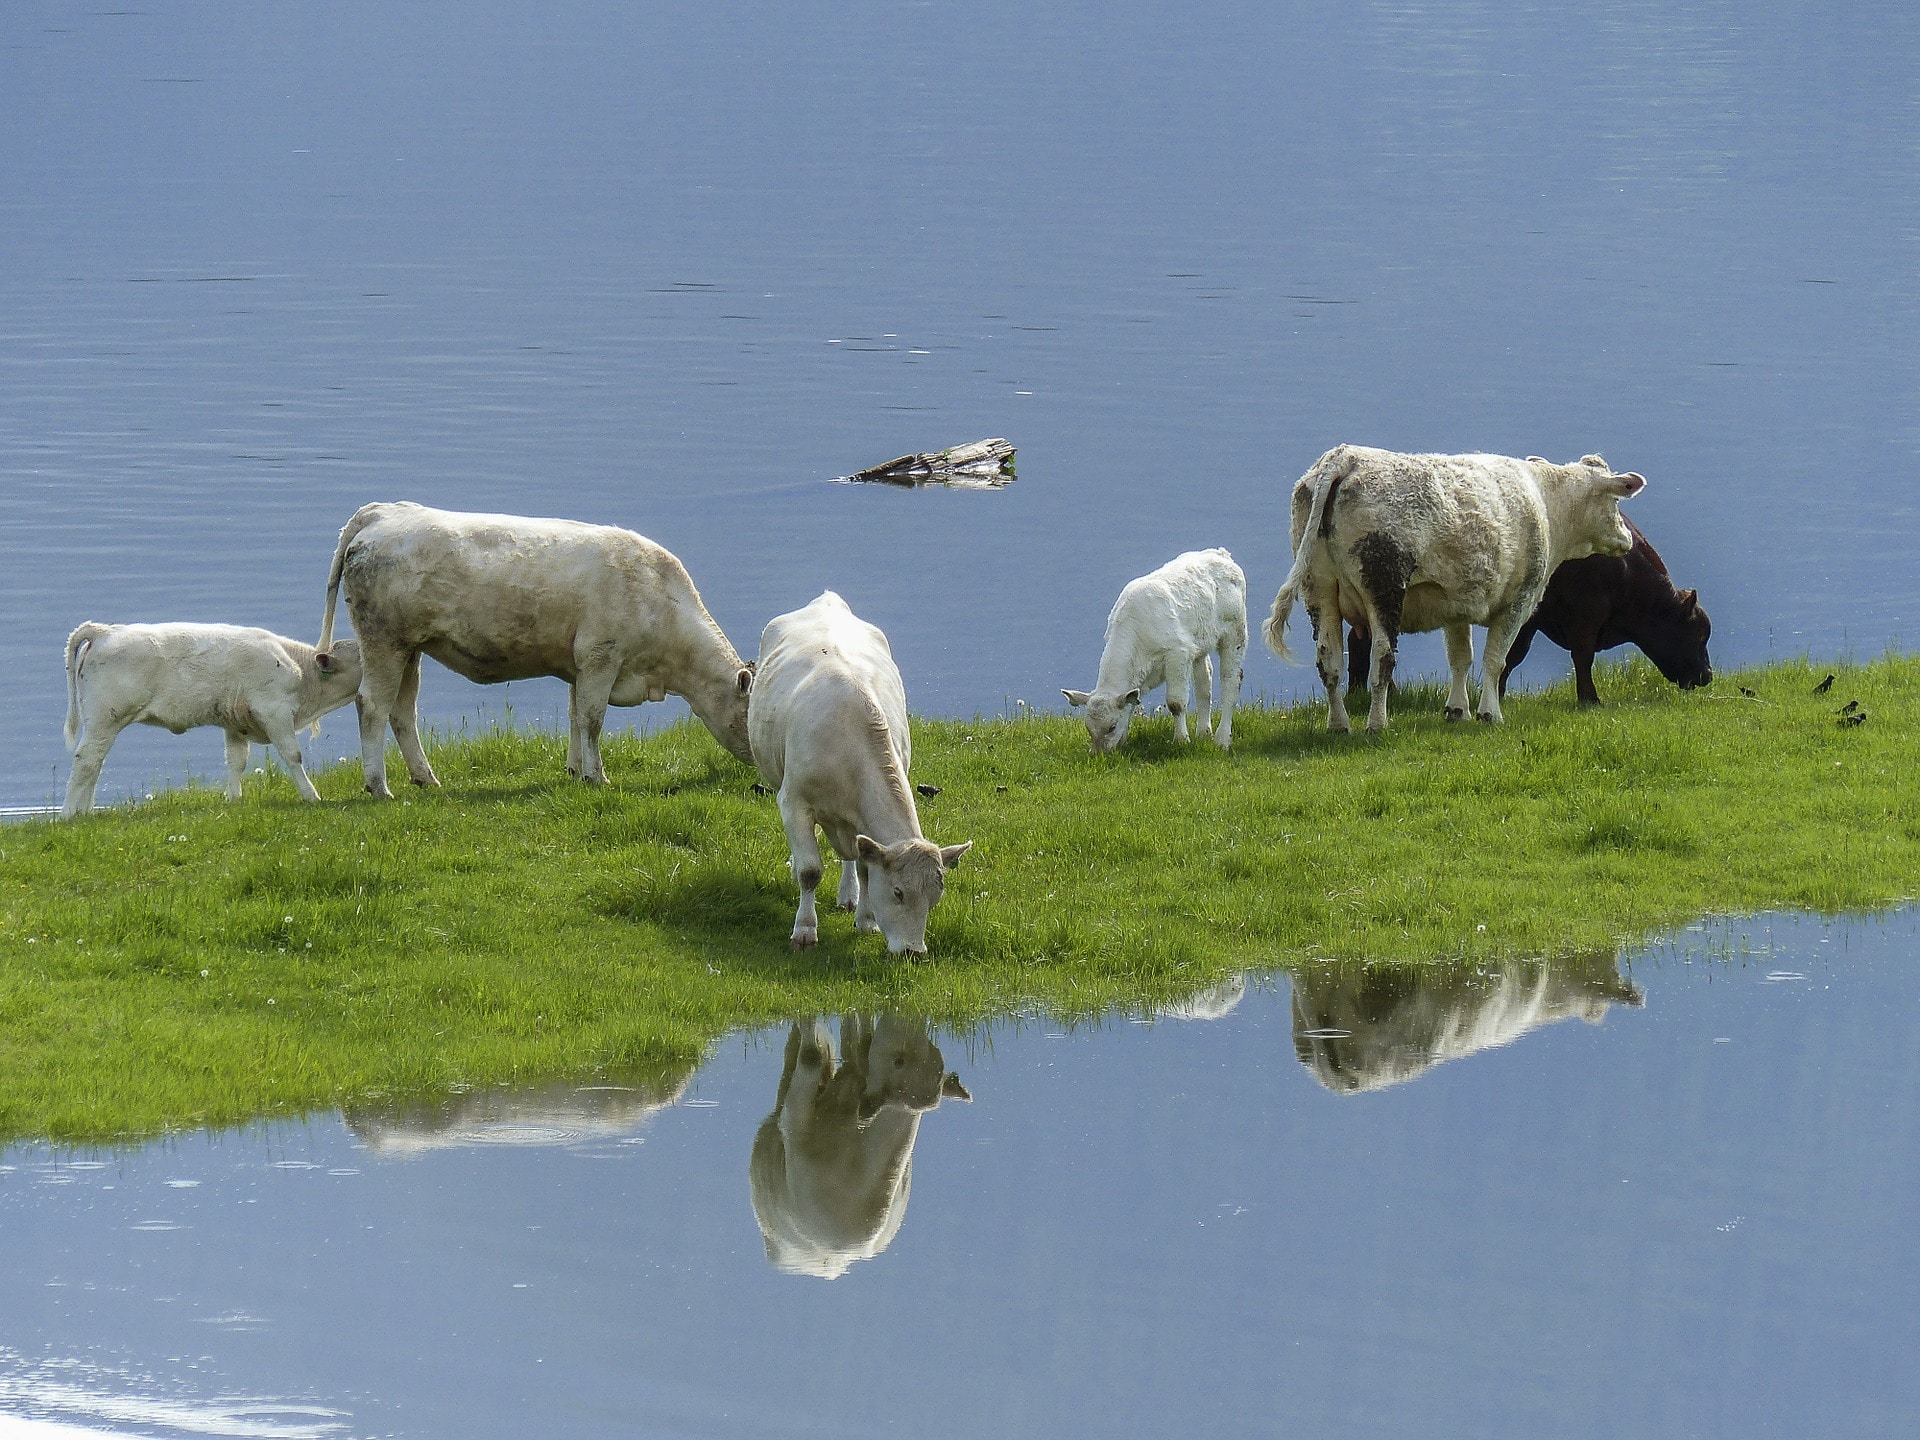 Cows in a flooded field